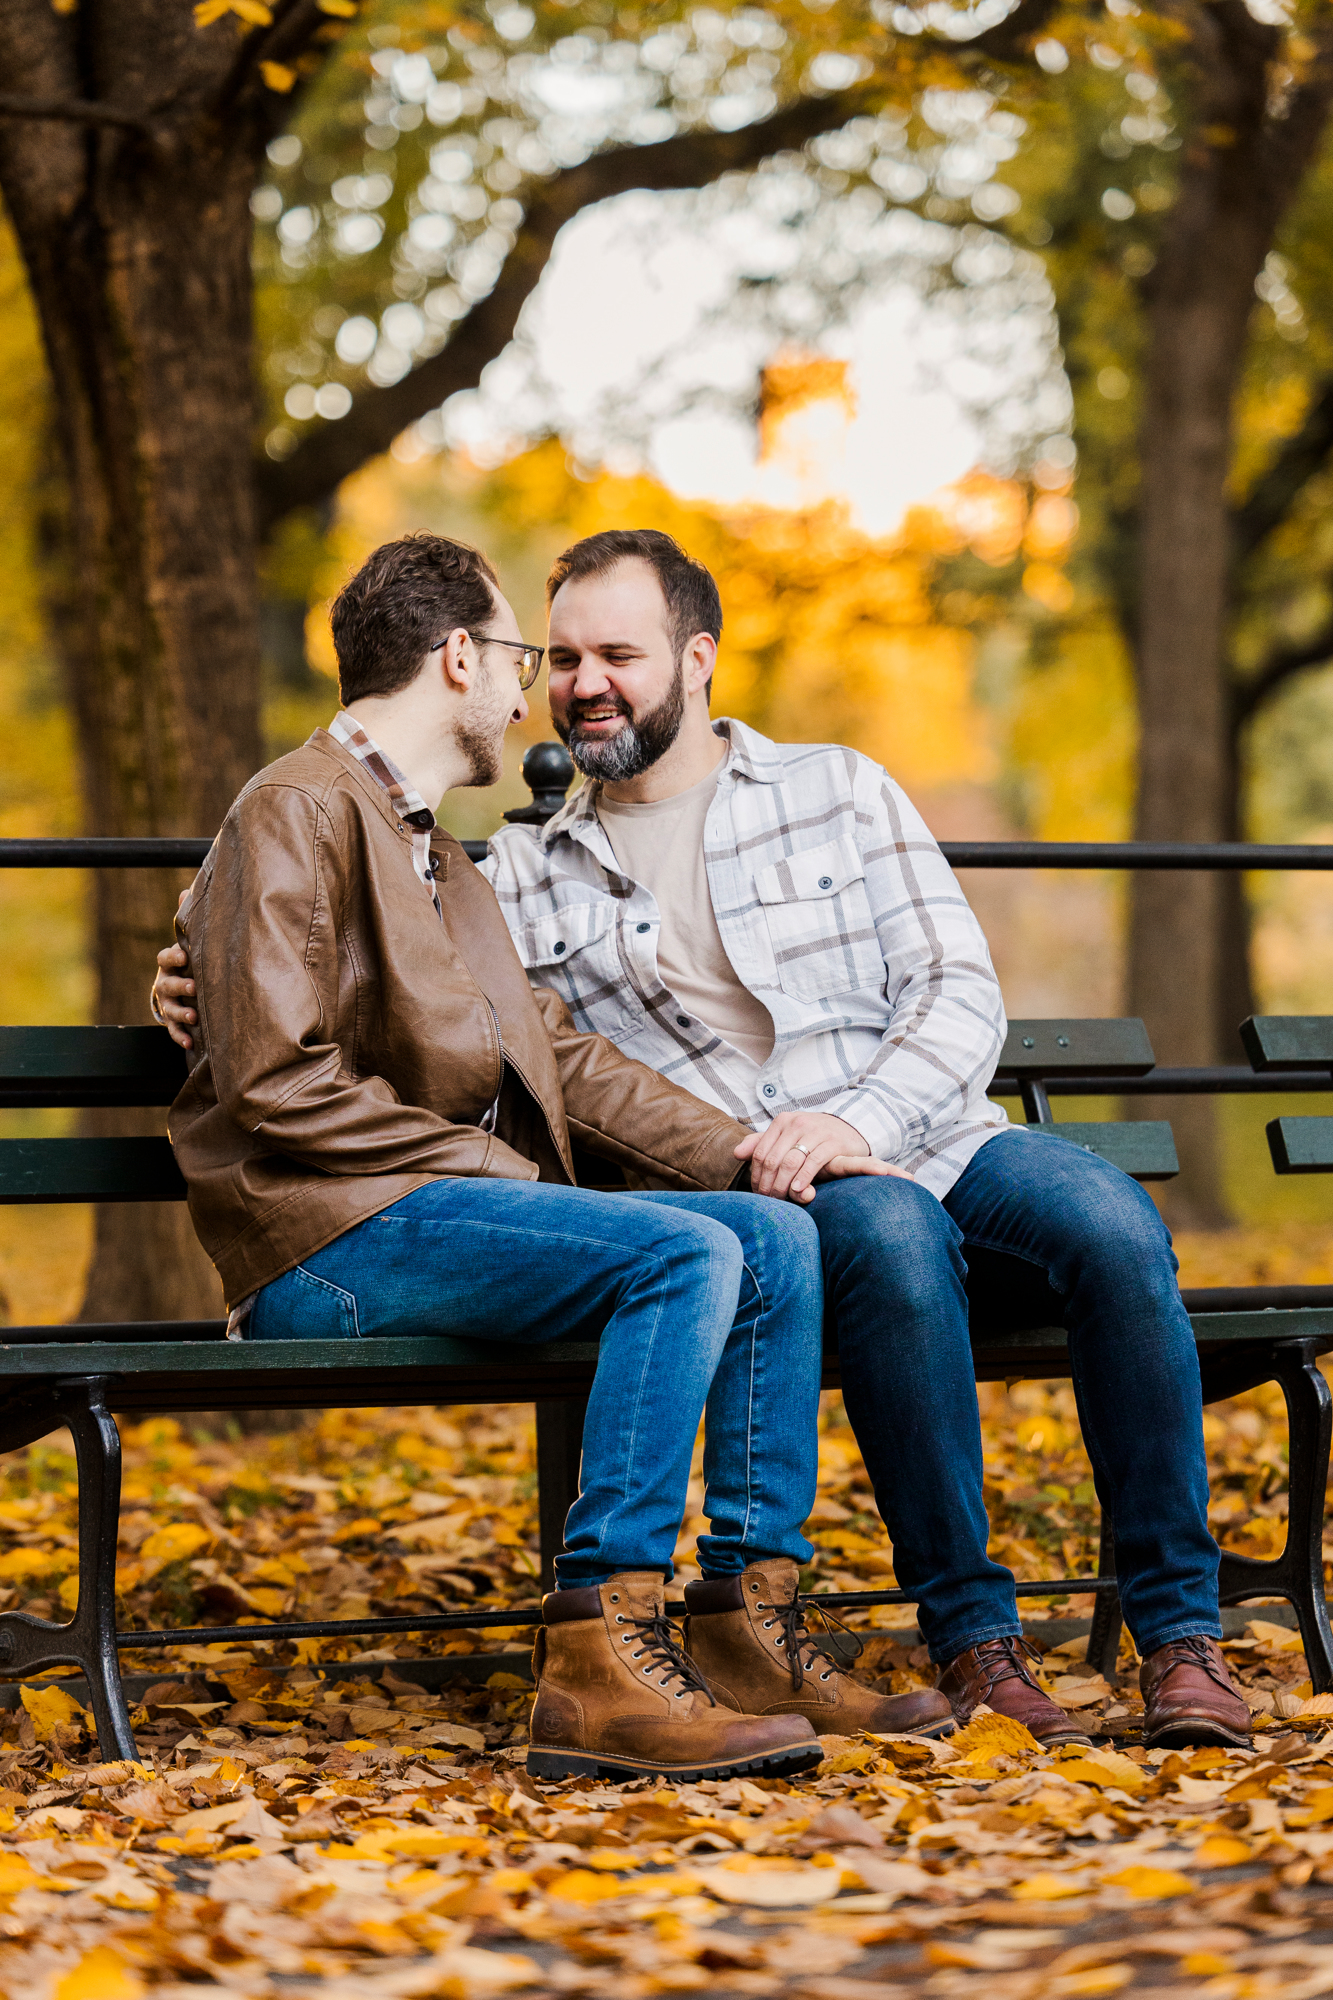 Authentic Engagement Photo Shoot in Central Park